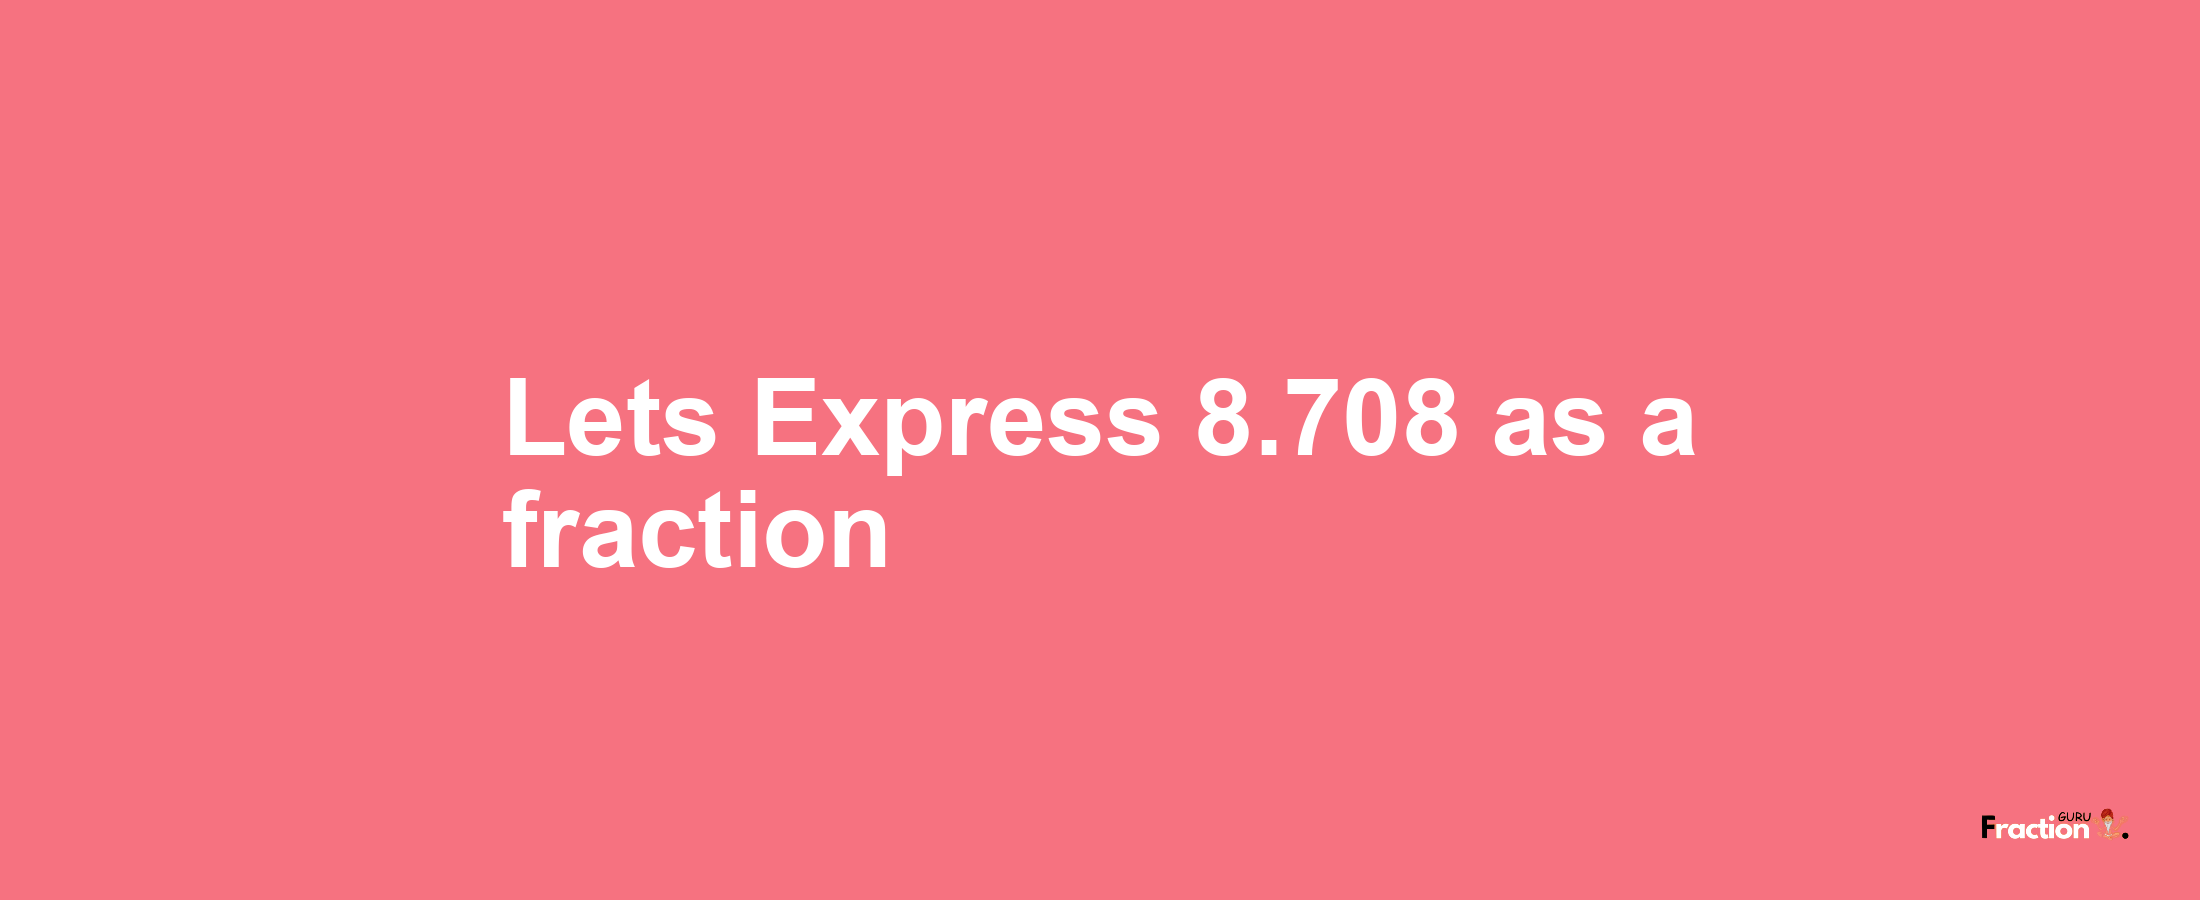 Lets Express 8.708 as afraction